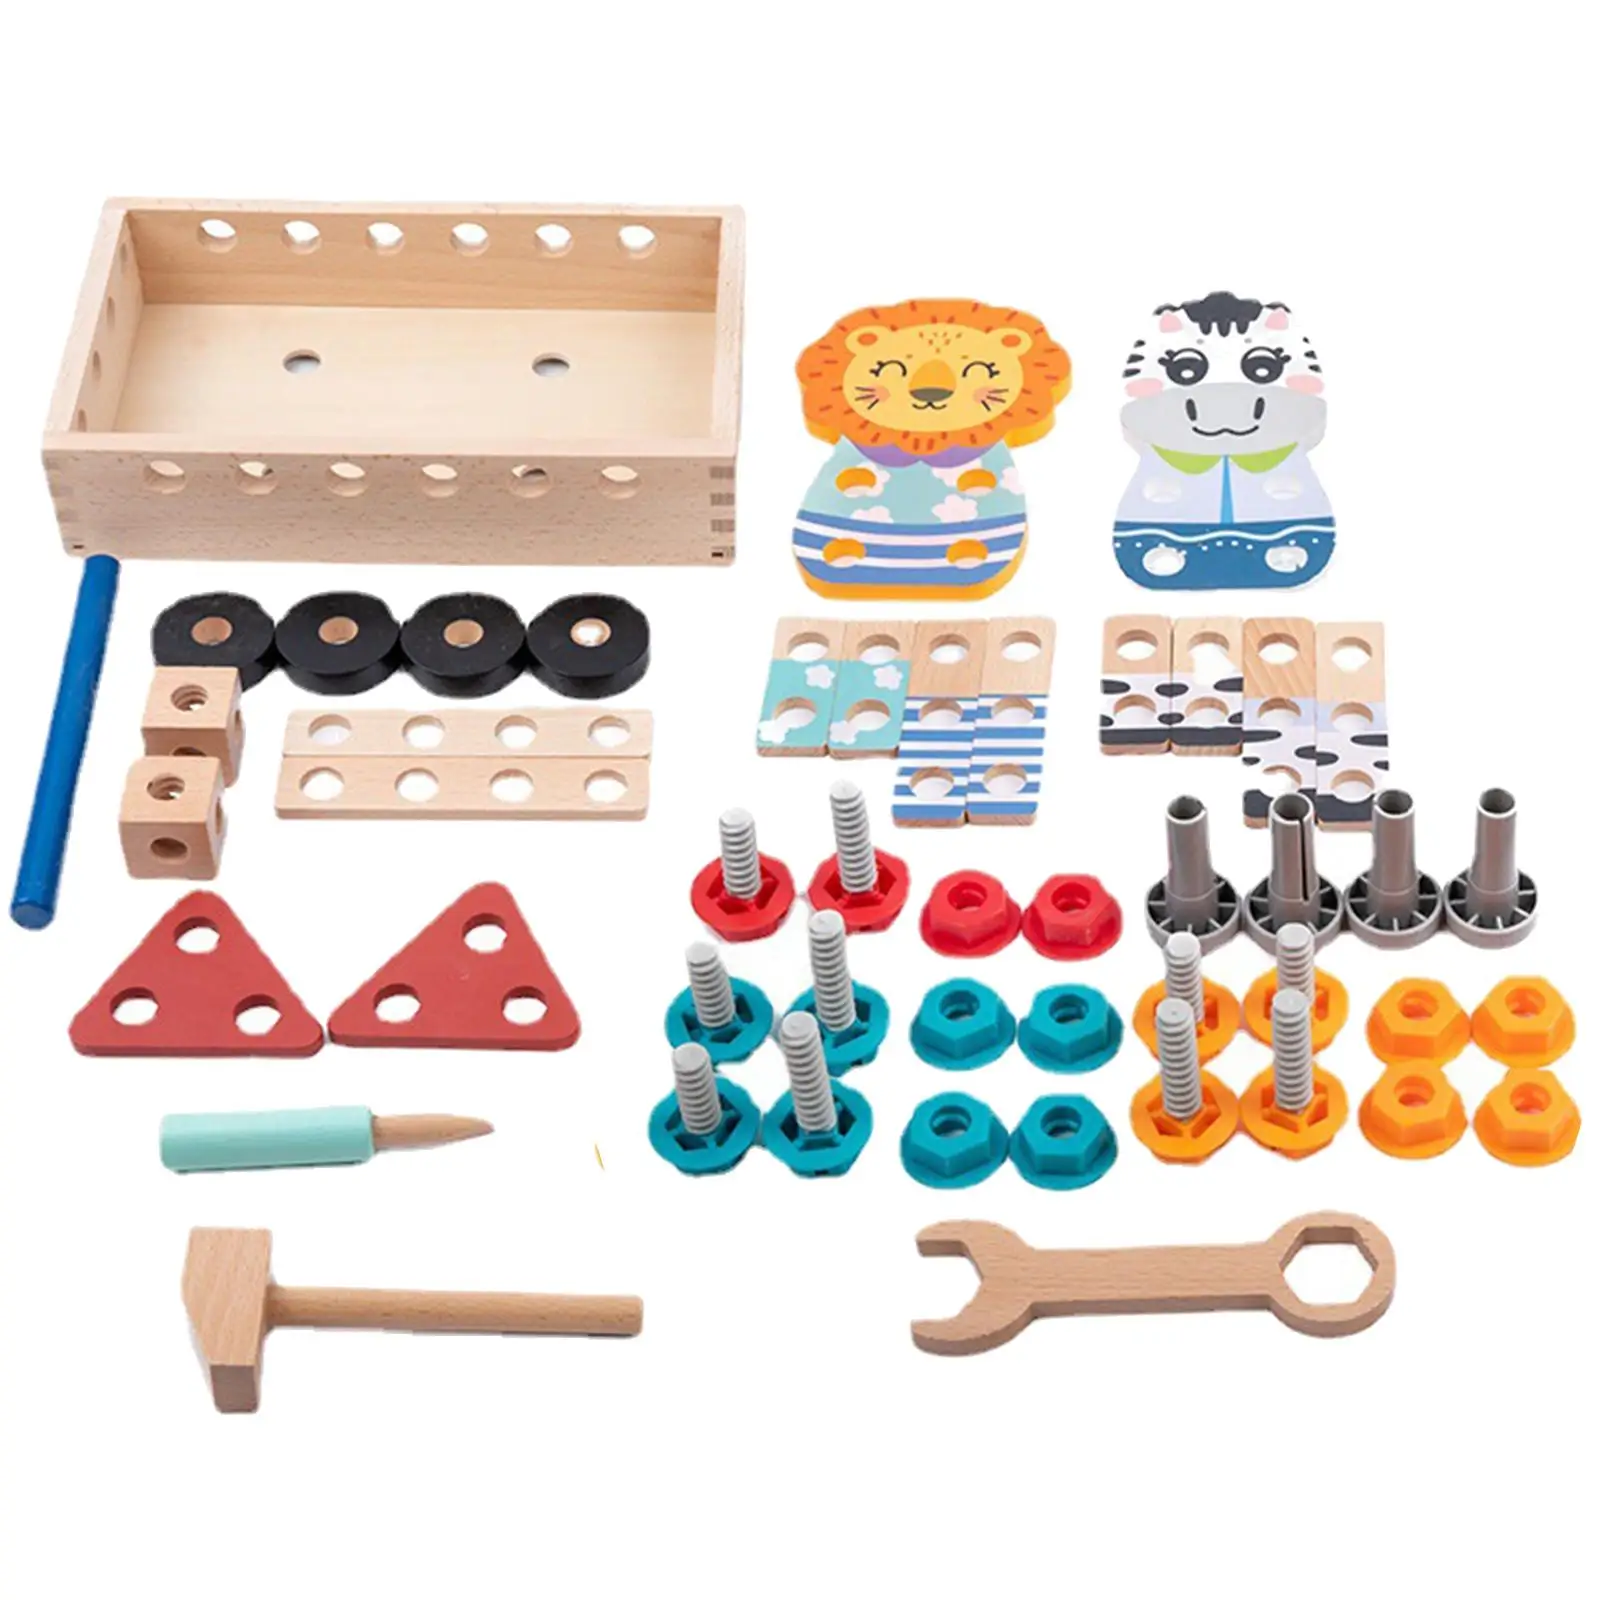 Toddler Tool Set, Wooden Tool Set Pretend Game, tool Kids Construction Toy Set for Activities